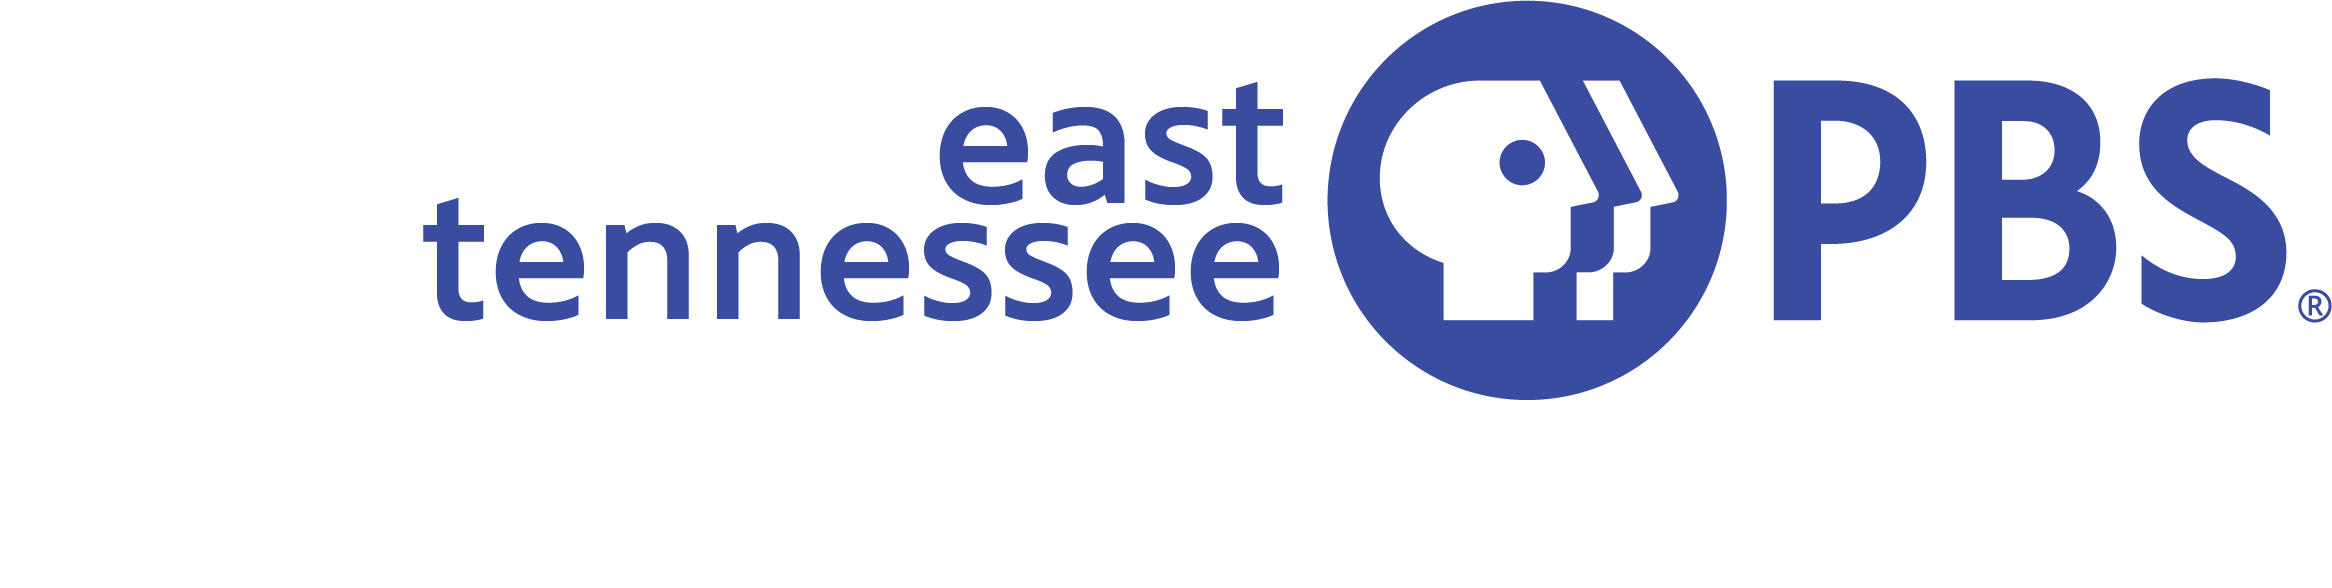 east tennessee pbs